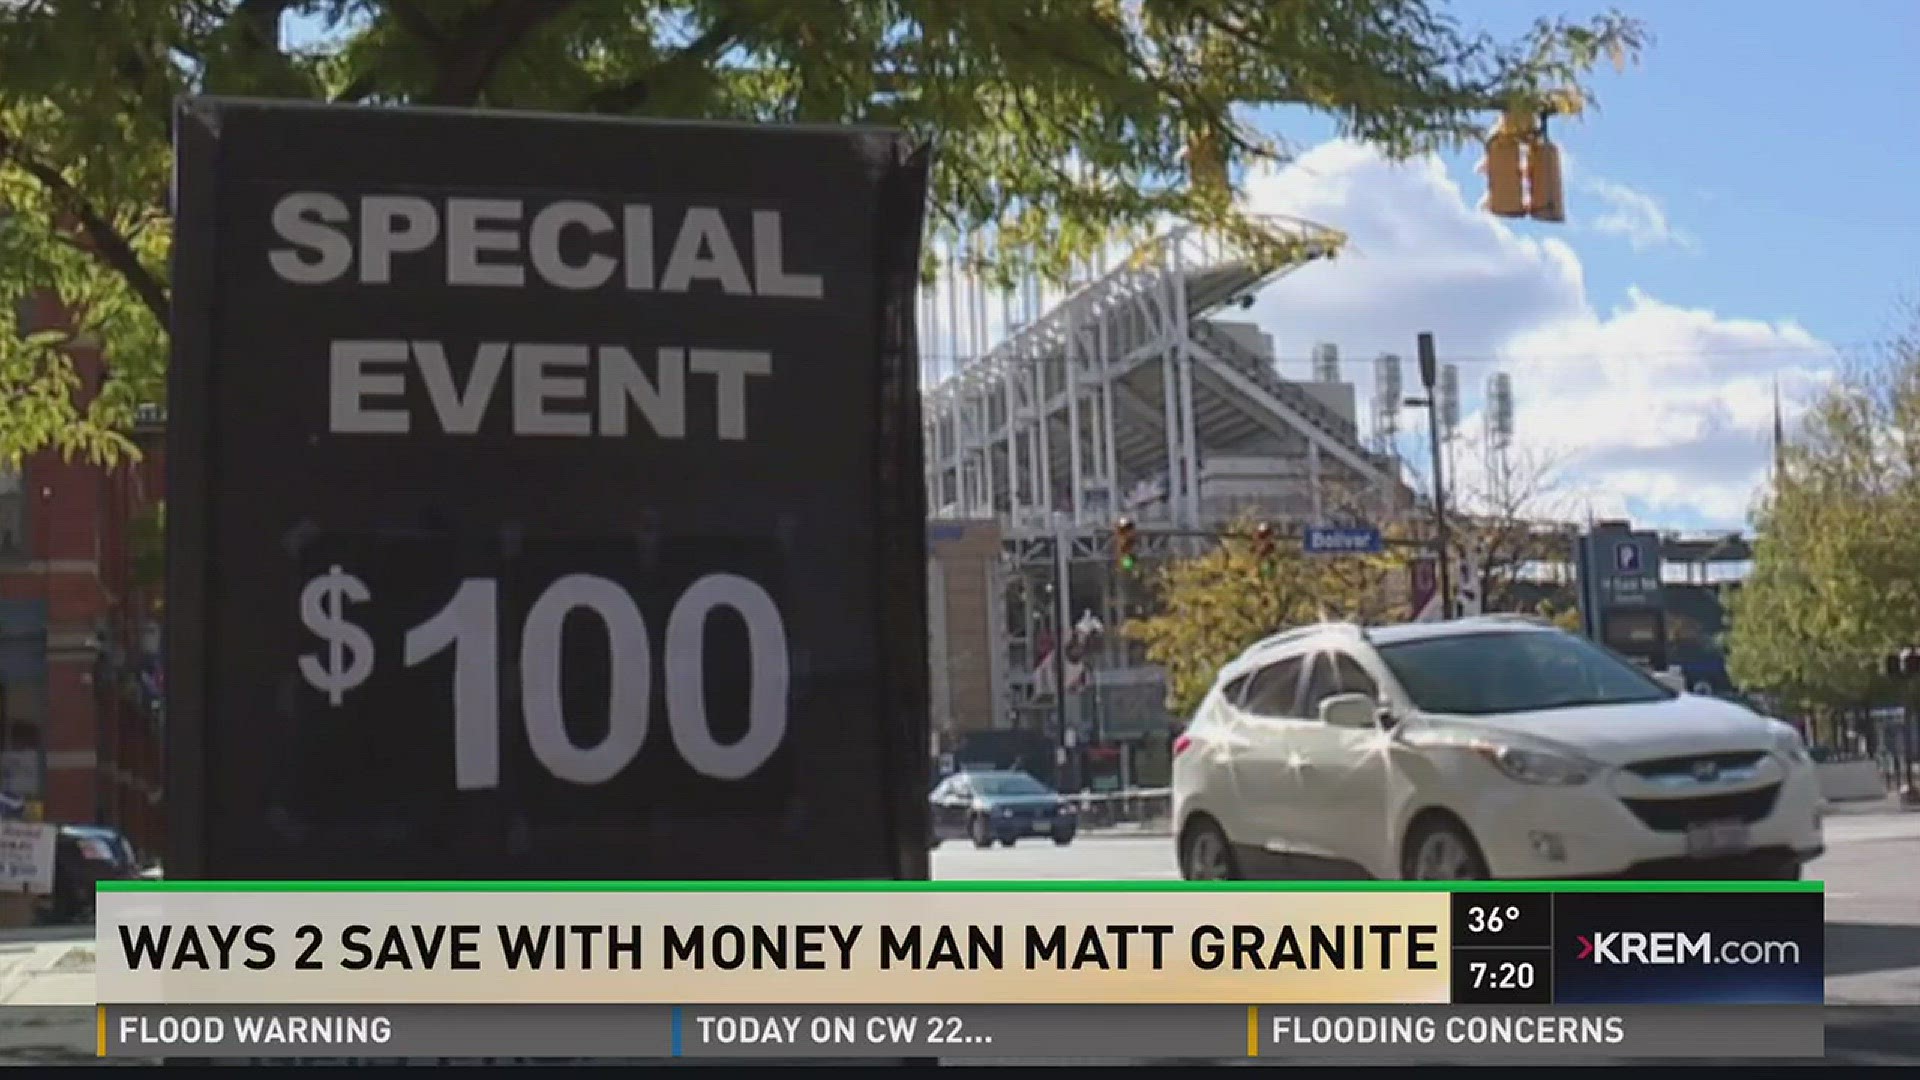 Today we help you find a better parking spot... And pay less! Money man matt granite steers us toward the savings...